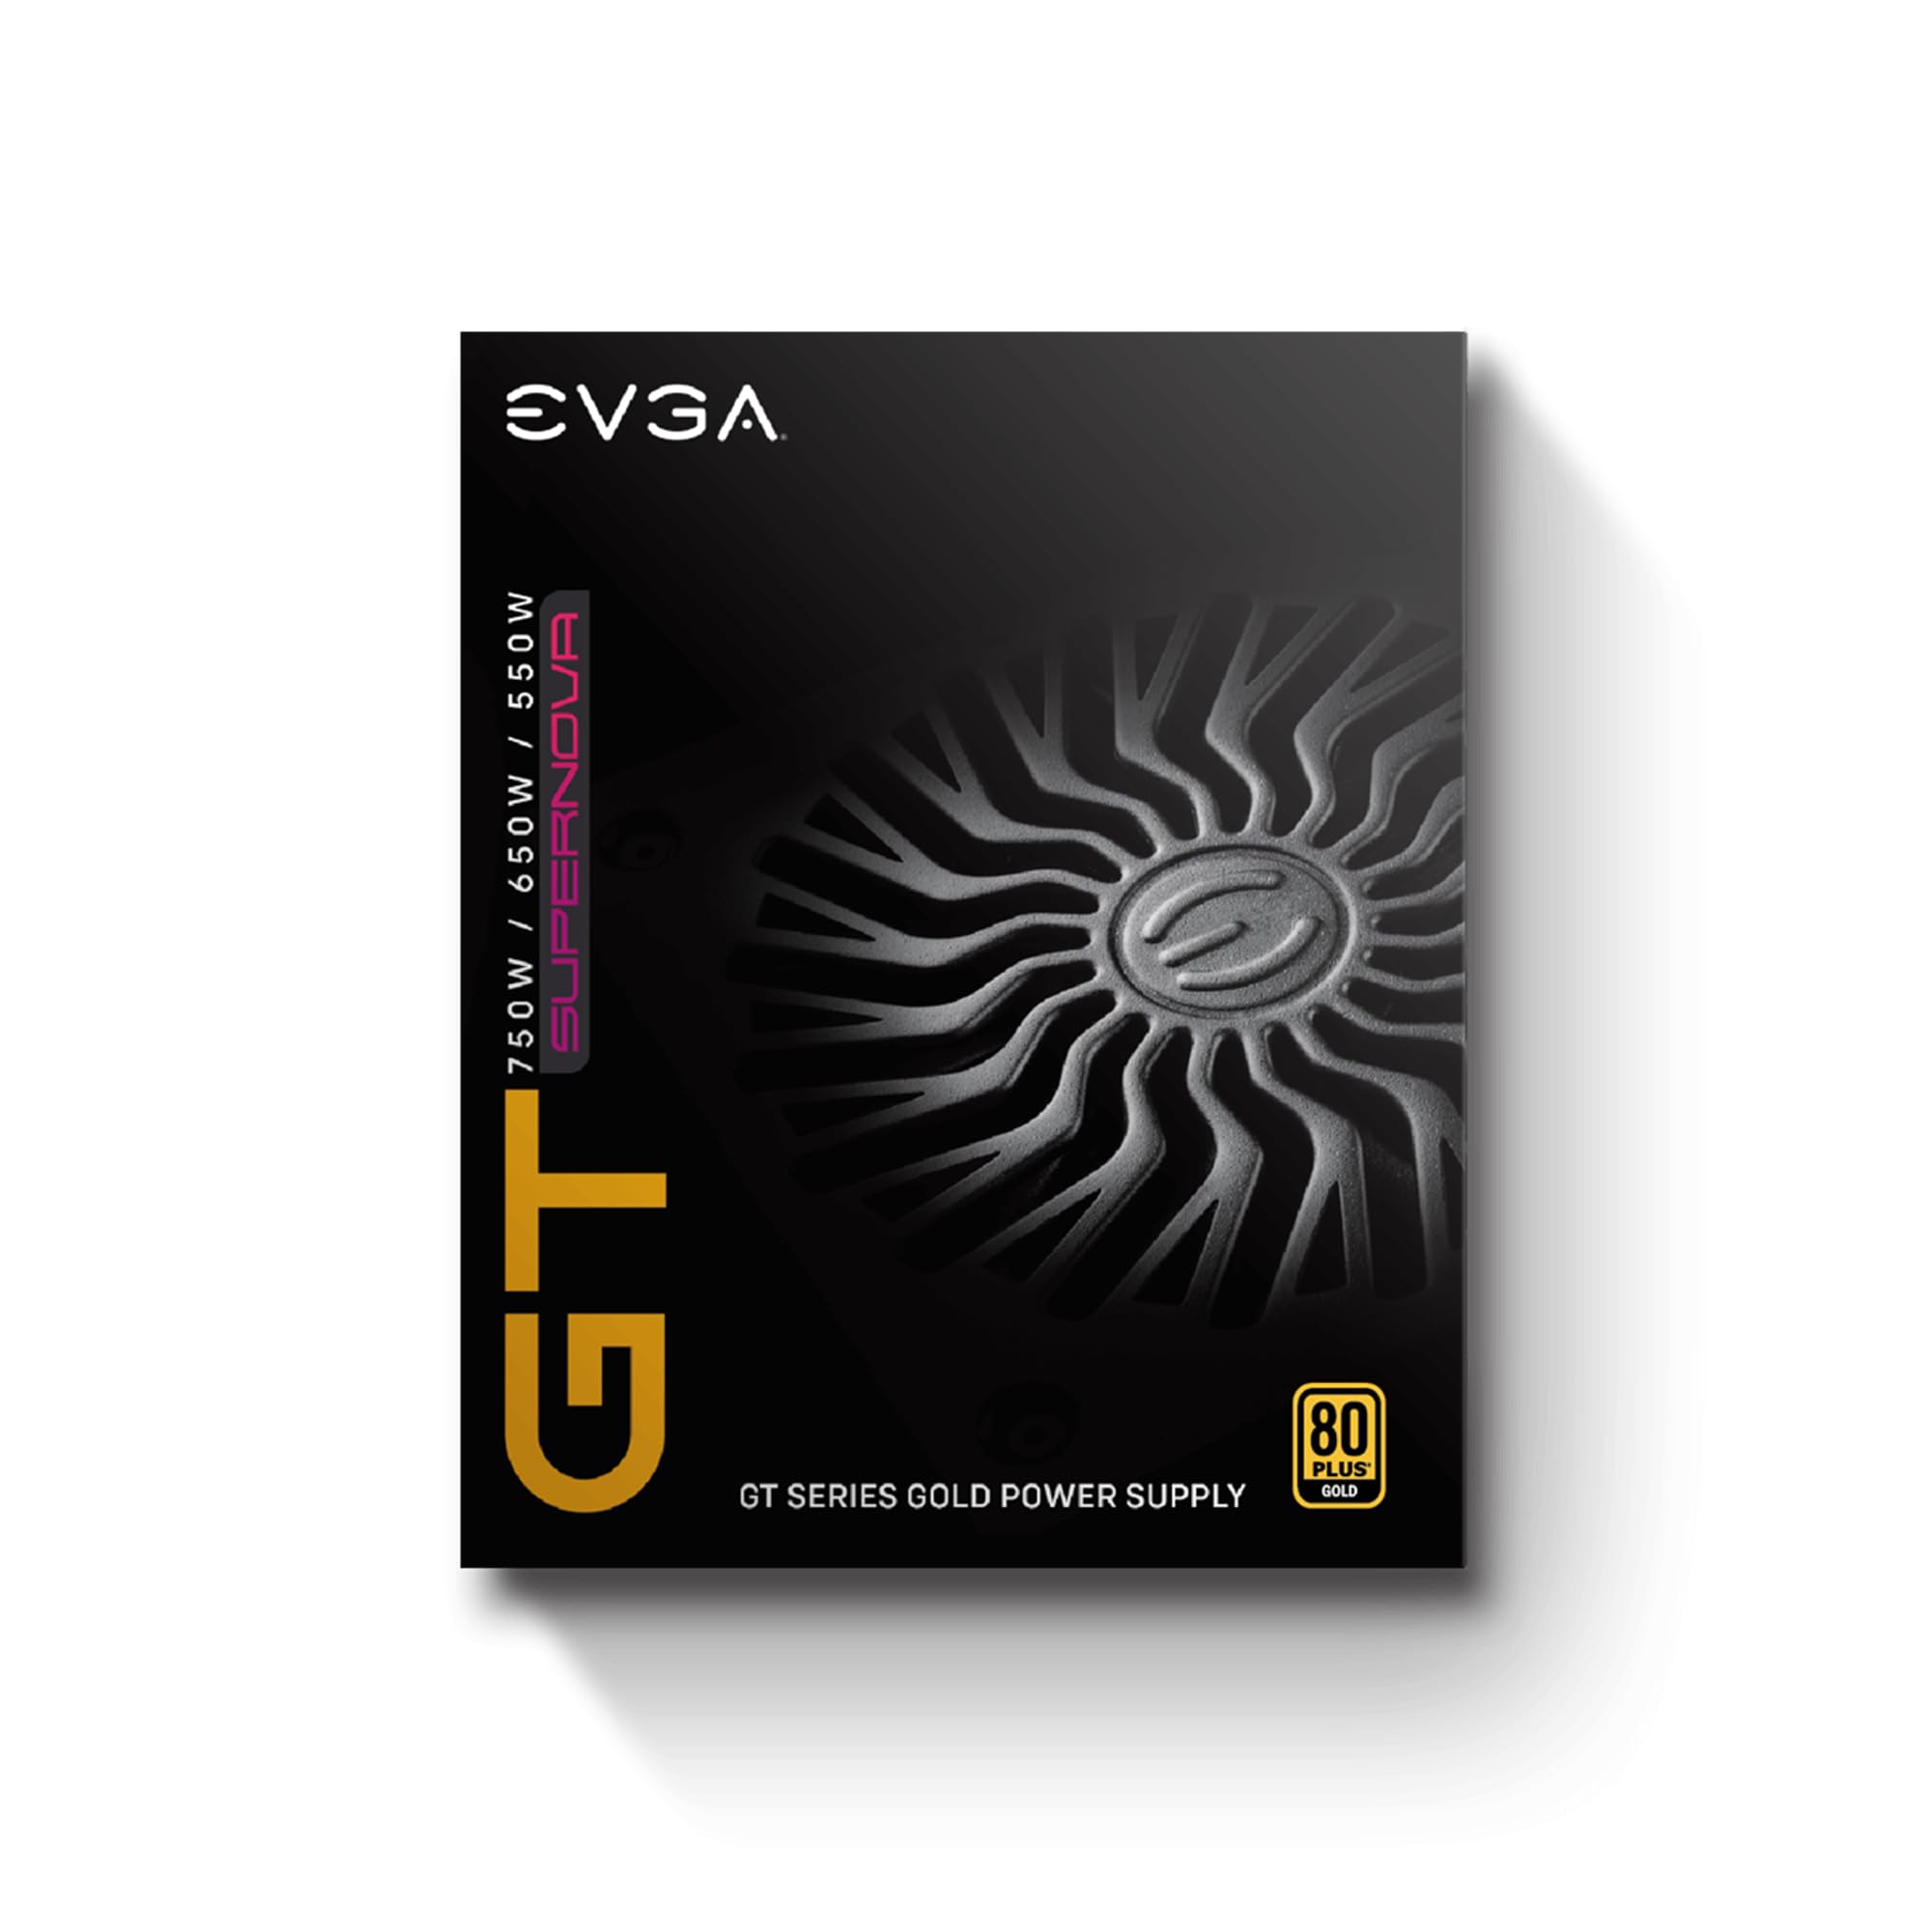 EVGA Supernova 550 GT, 80 Plus Gold 550W, Fully Modular, Auto Eco Mode with FDB Fan, 7 Year Warranty, Includes Power ON Self Tester, Compact 150mm Size, Power Supply 220-GT-0550-Y1